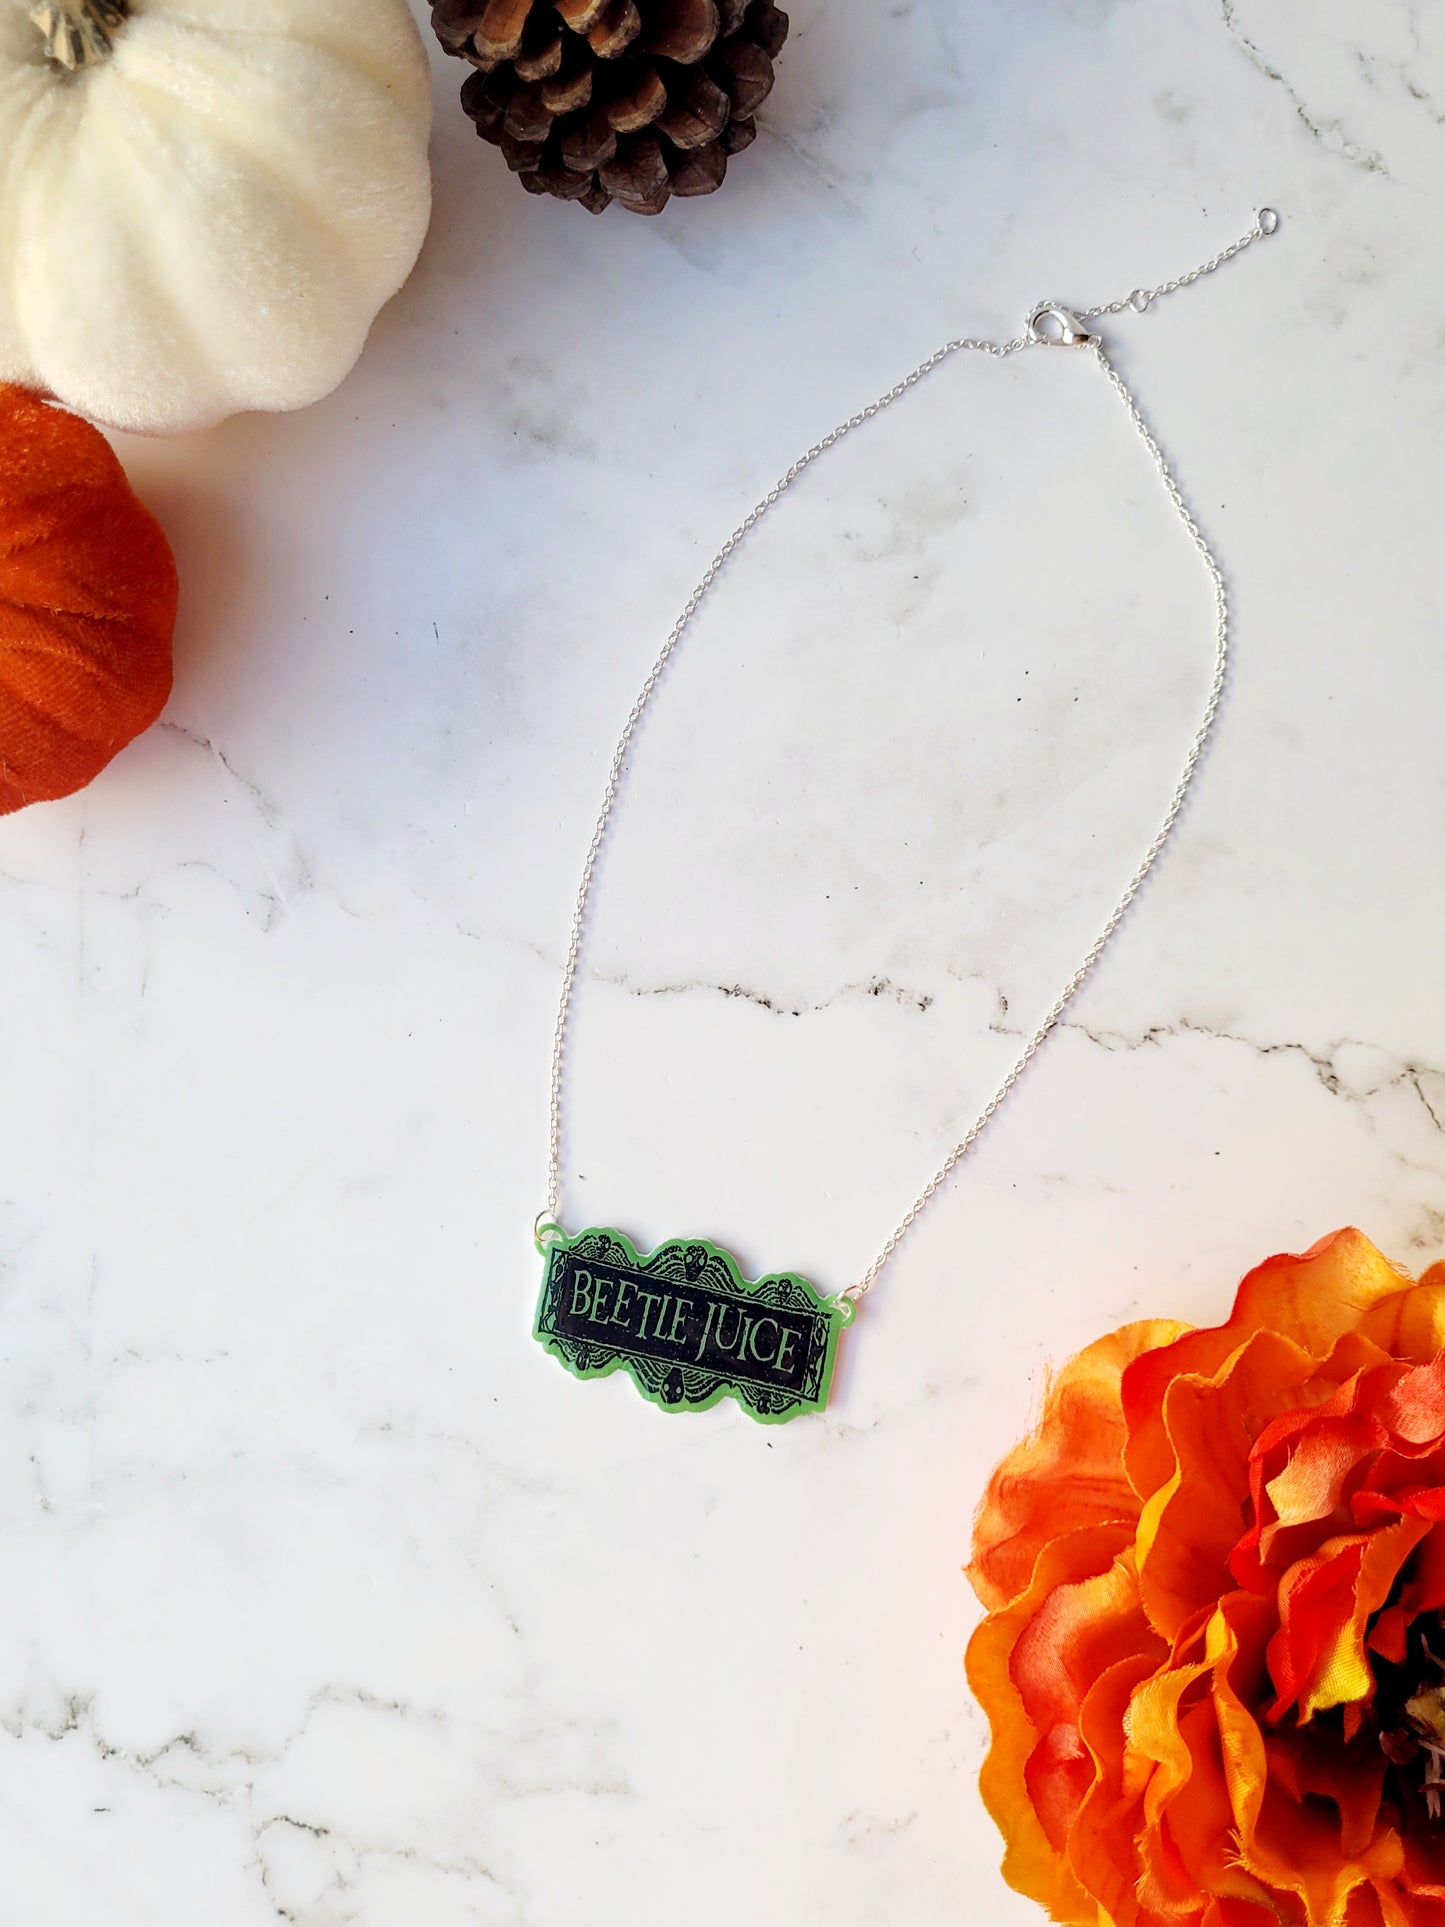 Beetlejuice logo necklace on a white marble background surrounded by fall foliage. 